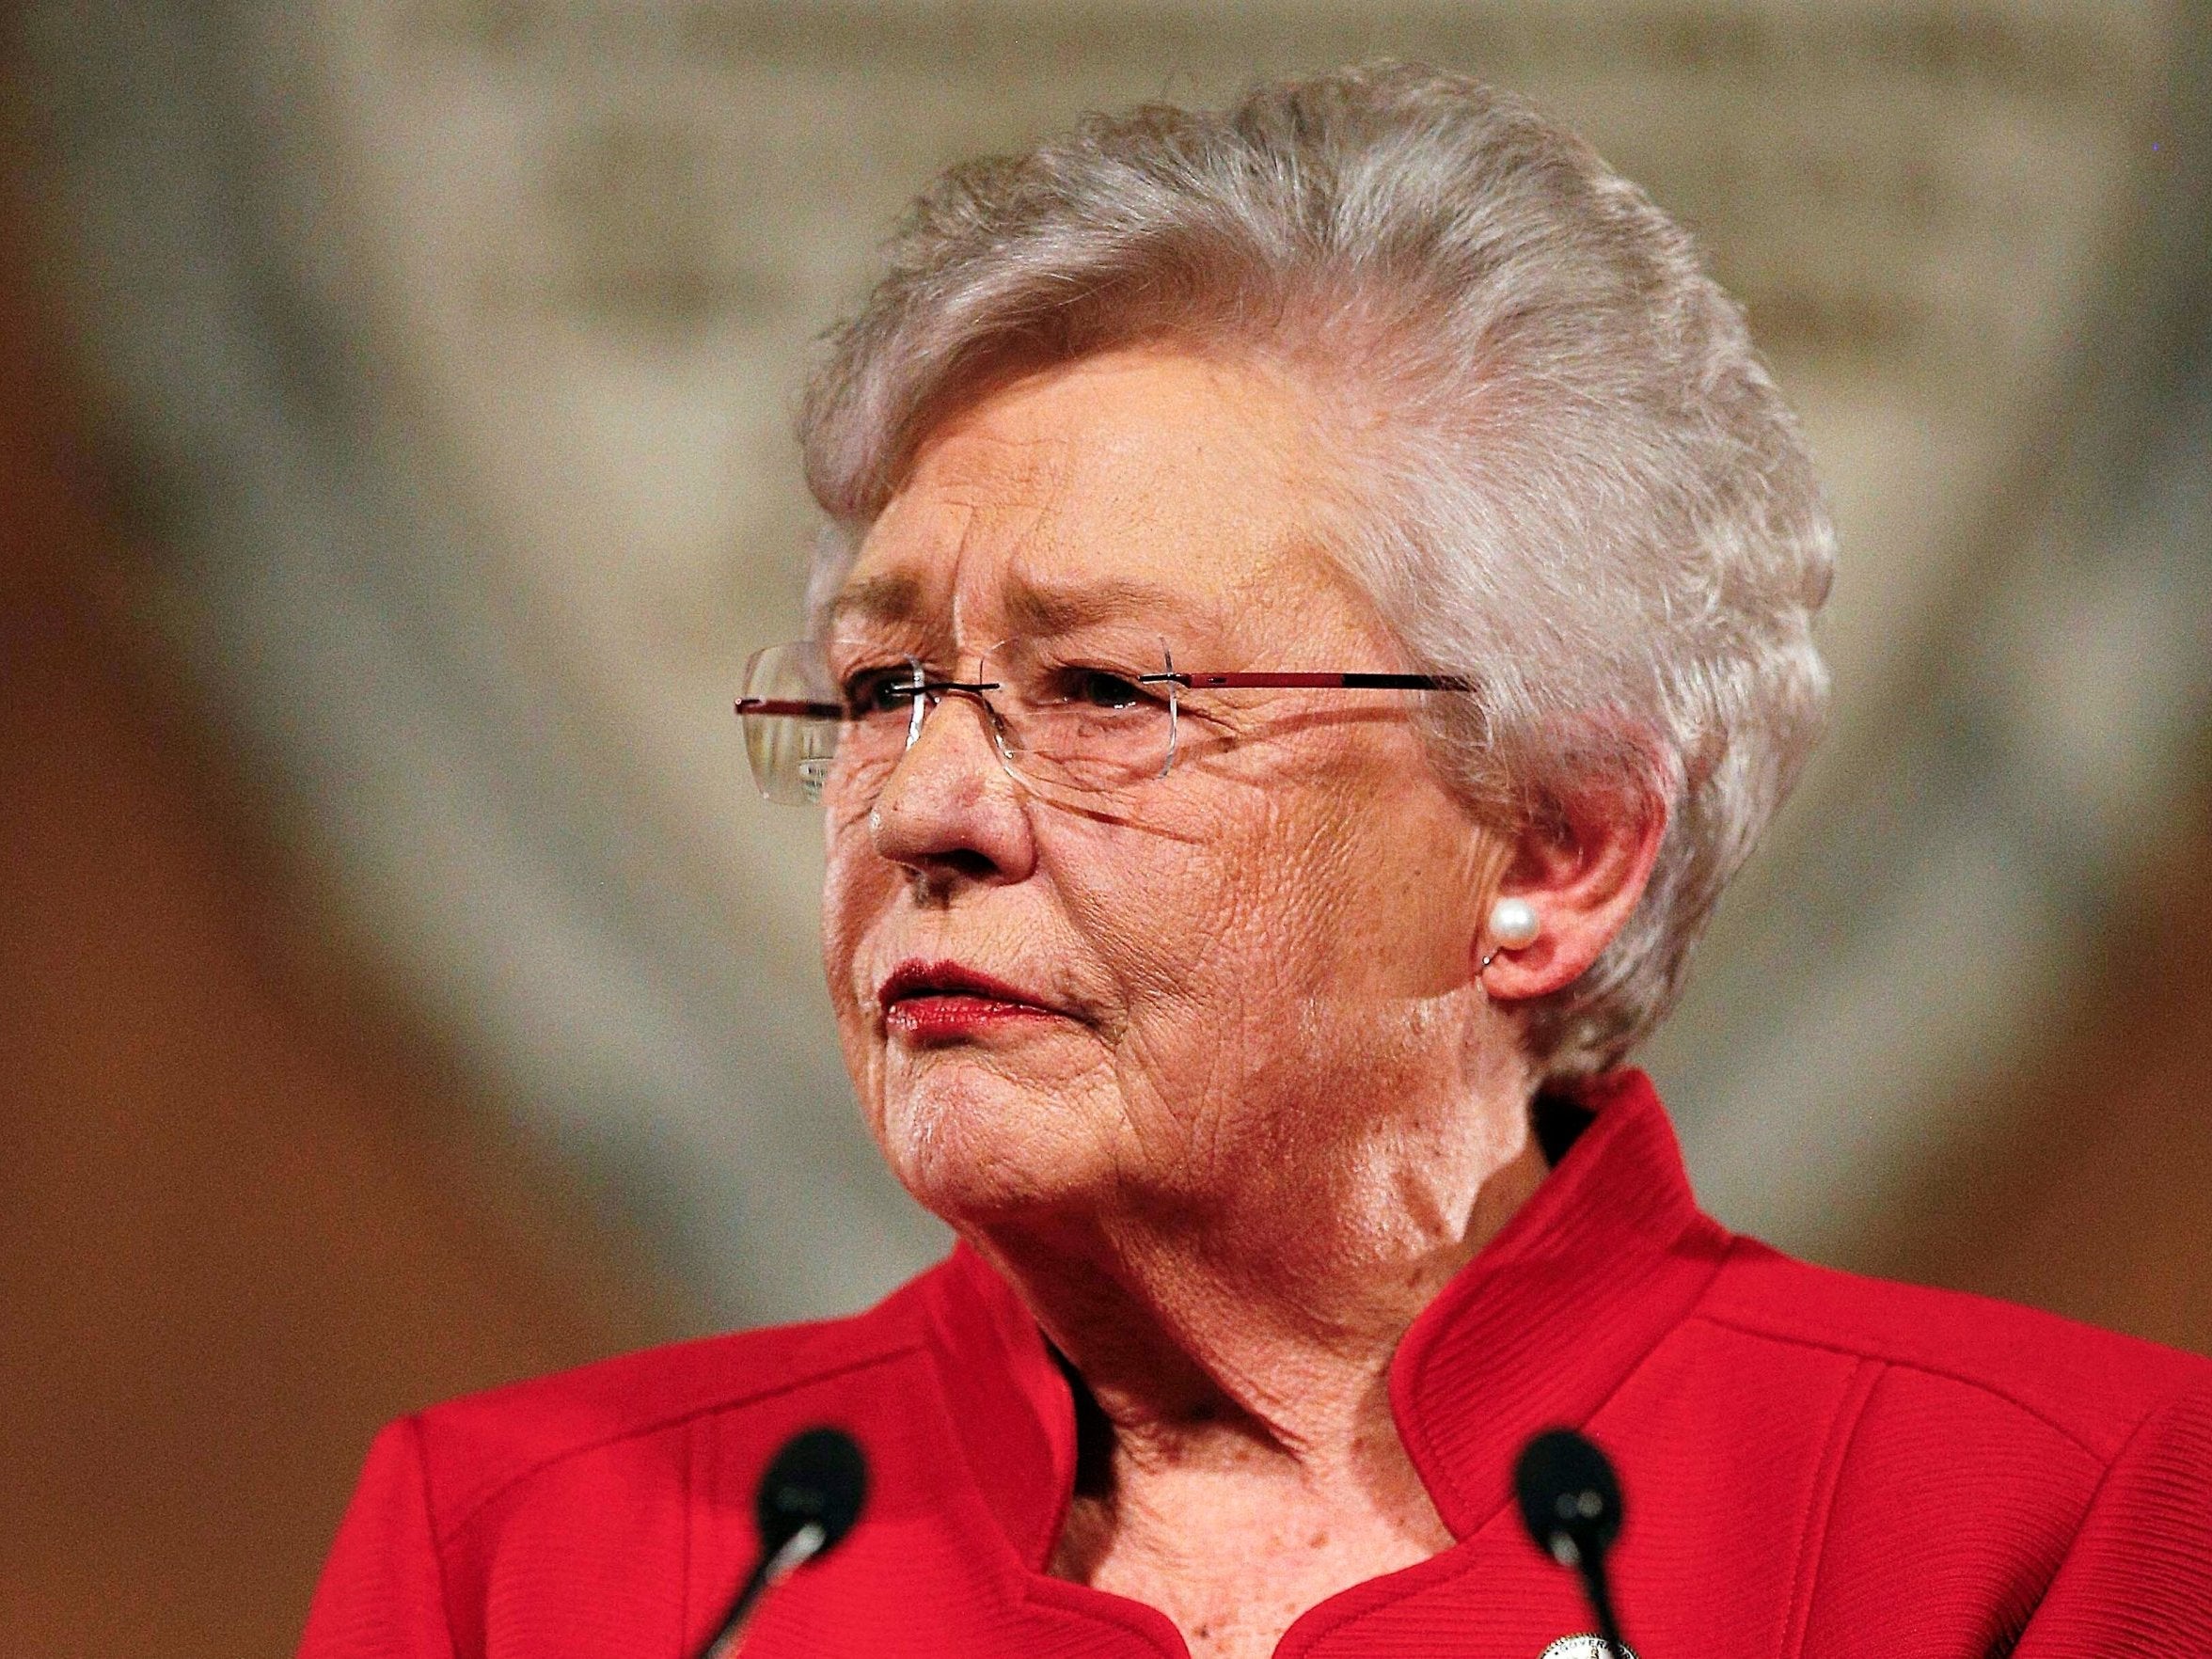 Alabama governor Kay Ivey has apologized to a survivor of the 1963 KKK bombing, who is now seeking restitution from the state.